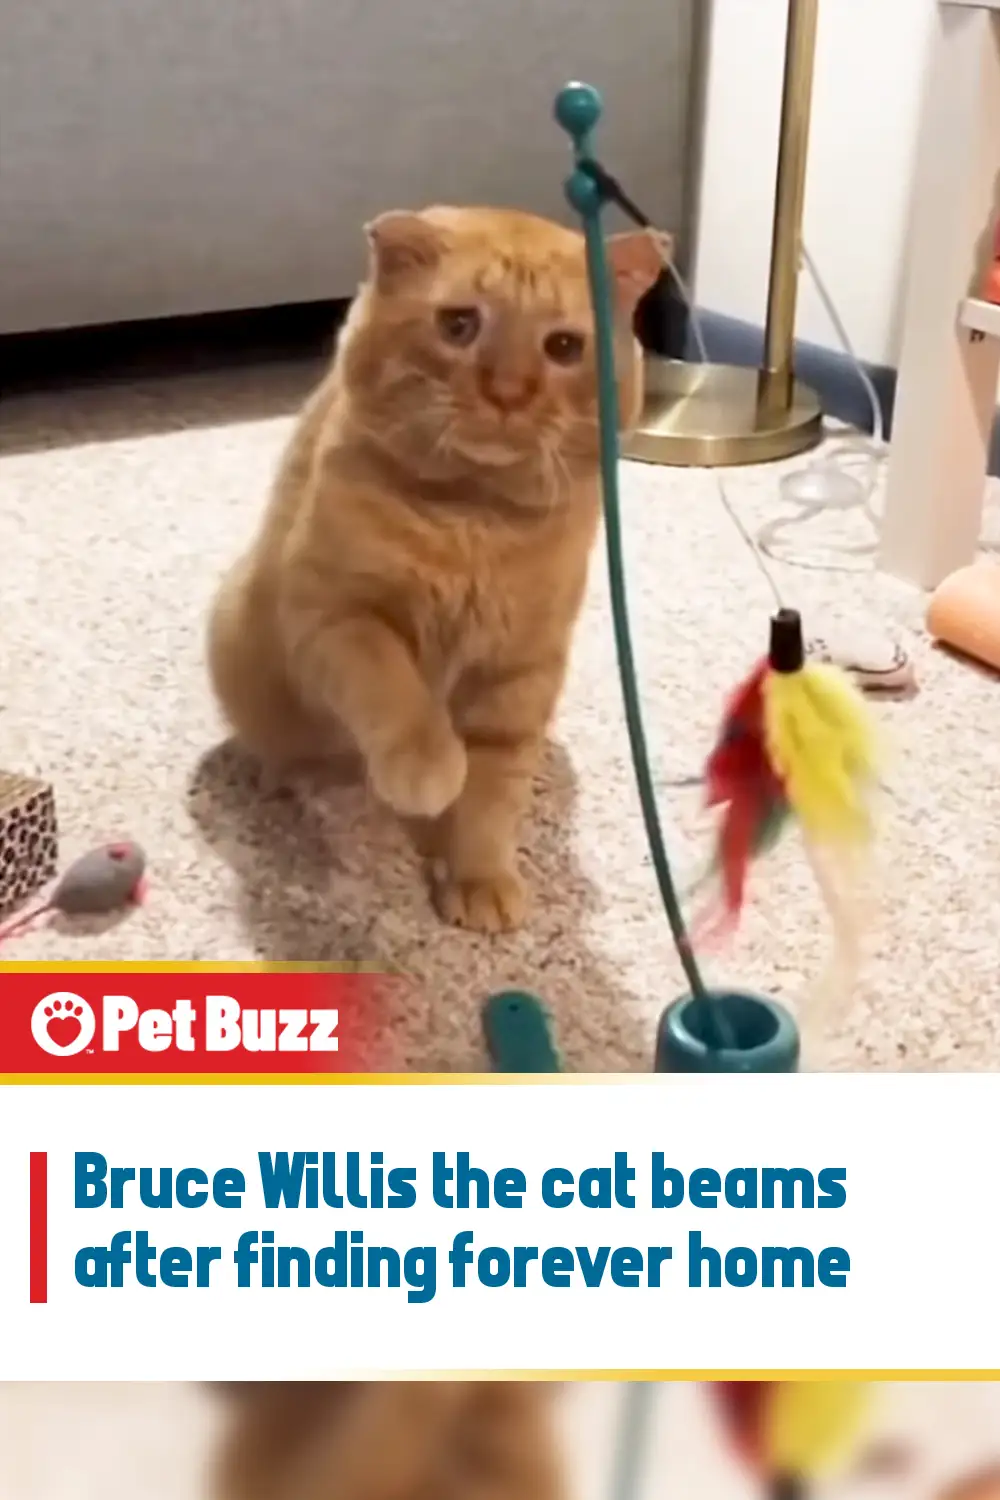 Bruce Willis the cat beams after finding forever home